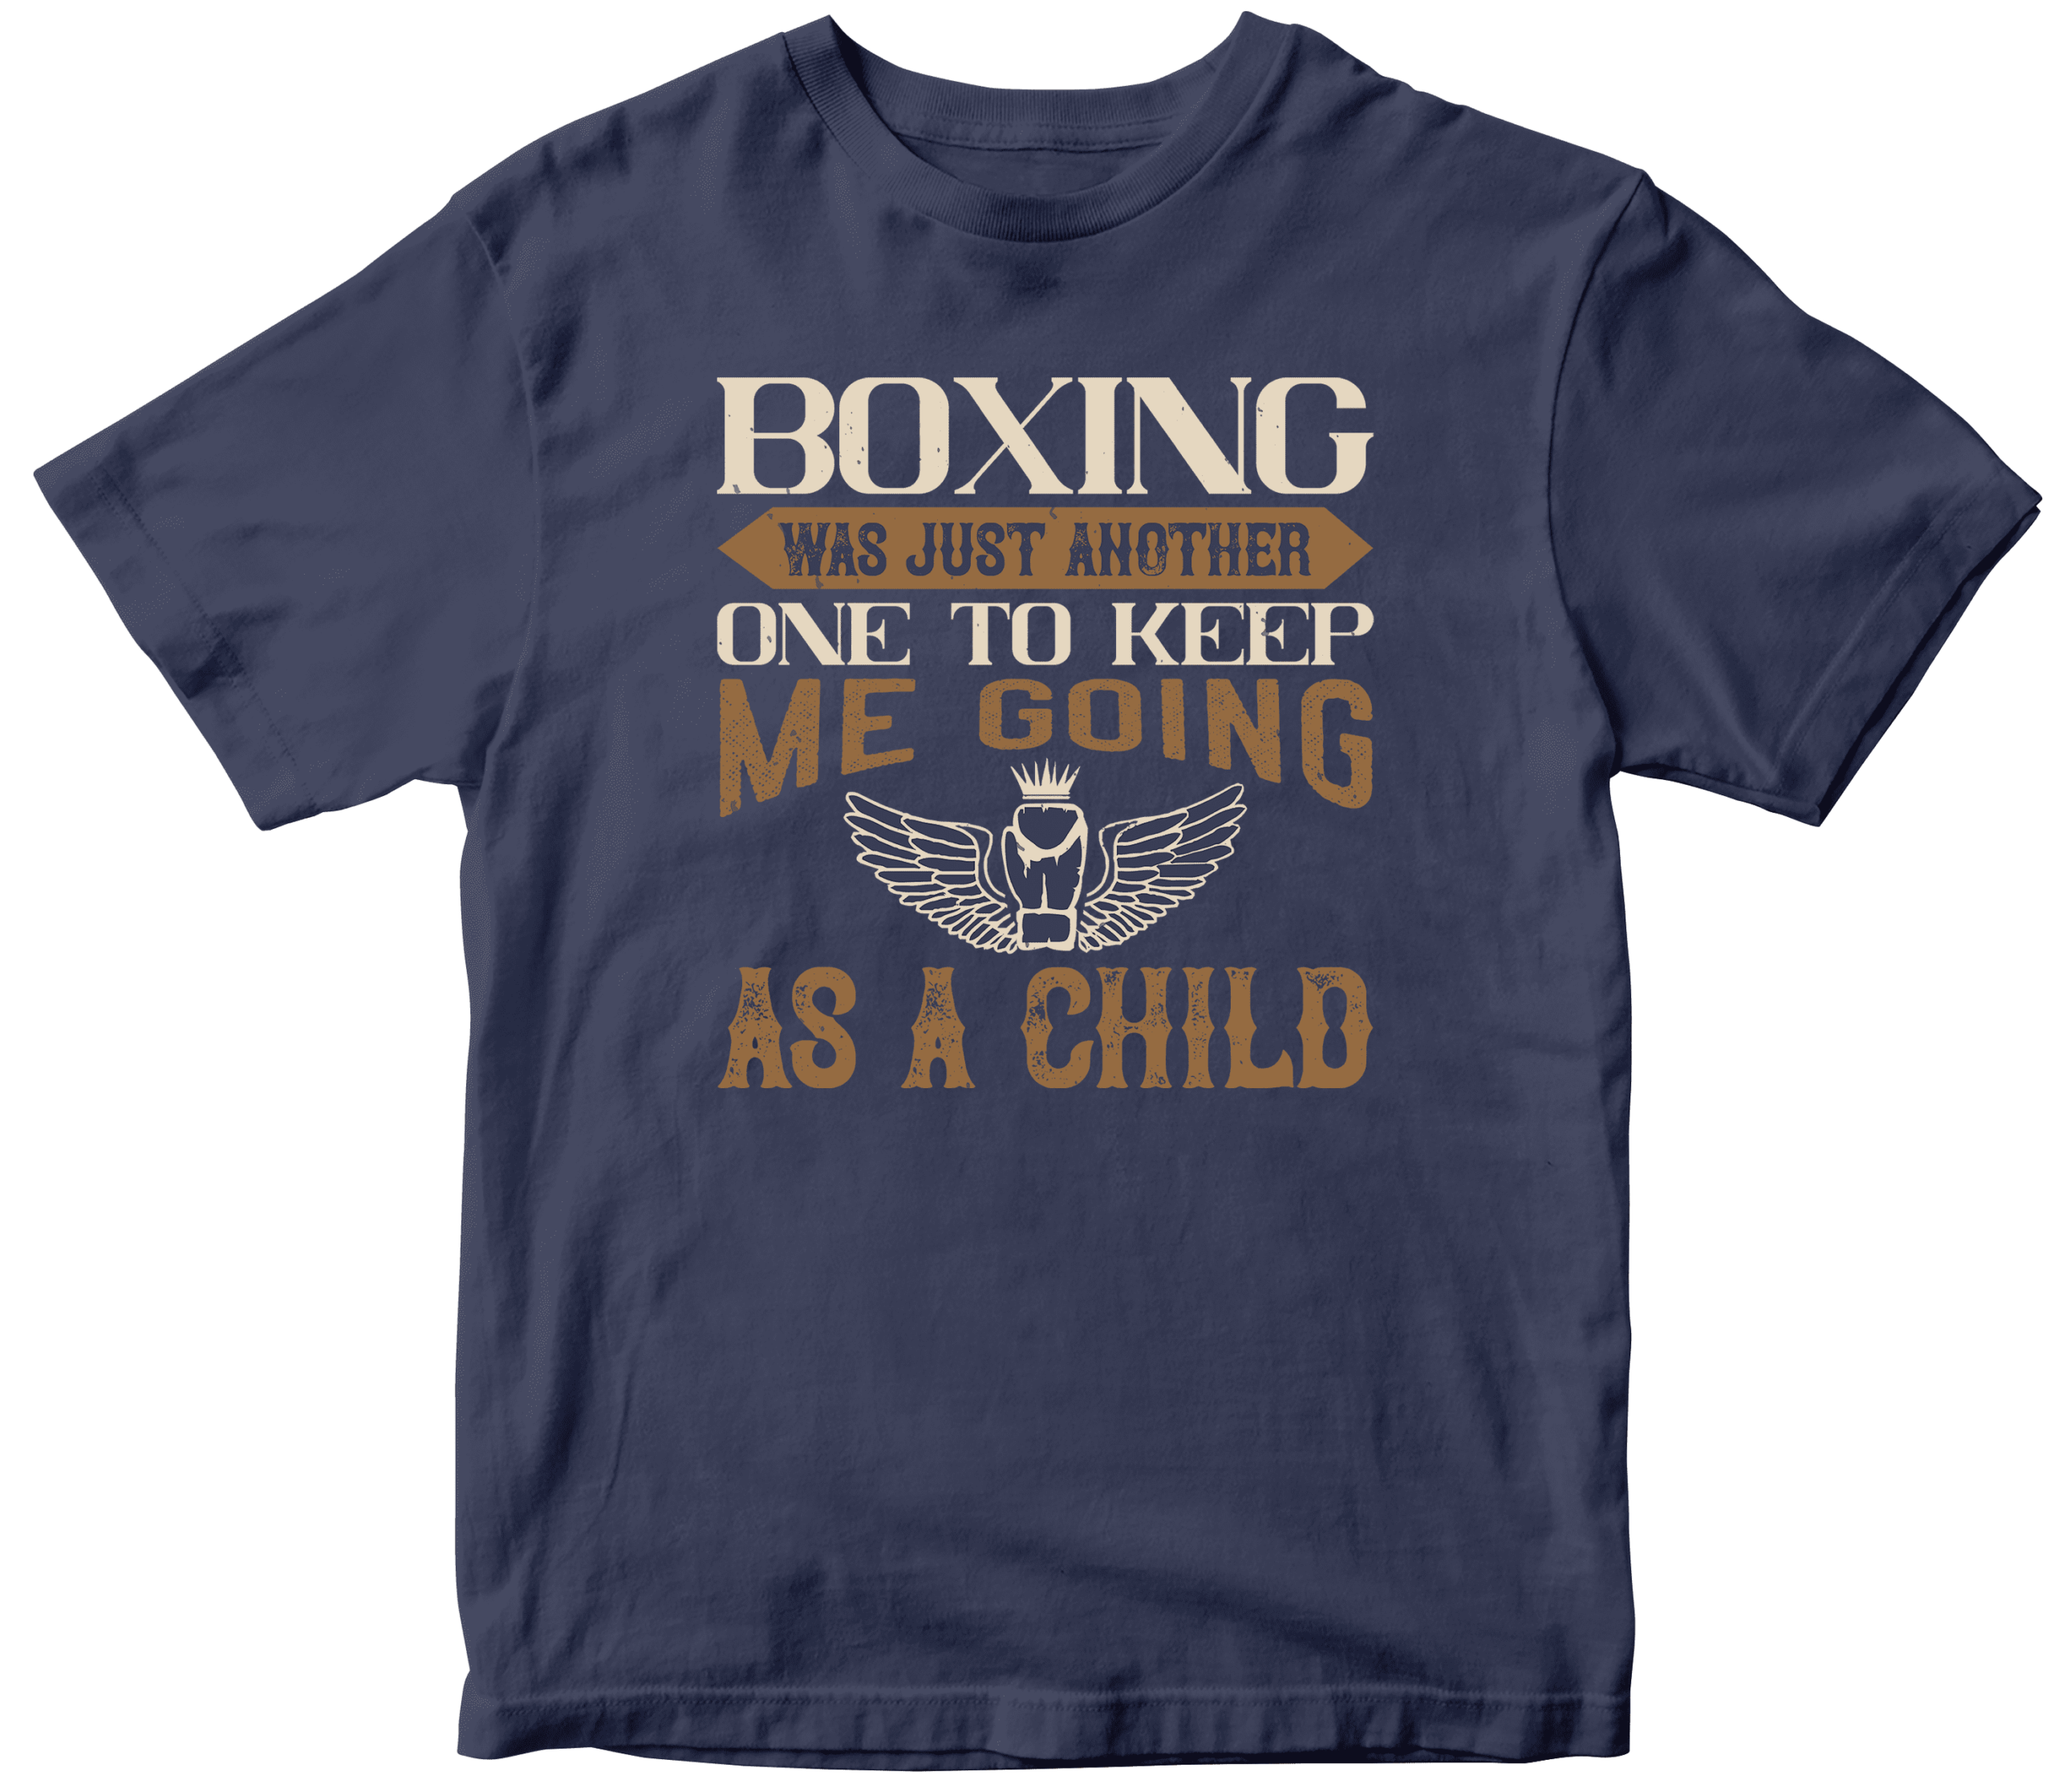 Boxing was just another one to keep me going as a child